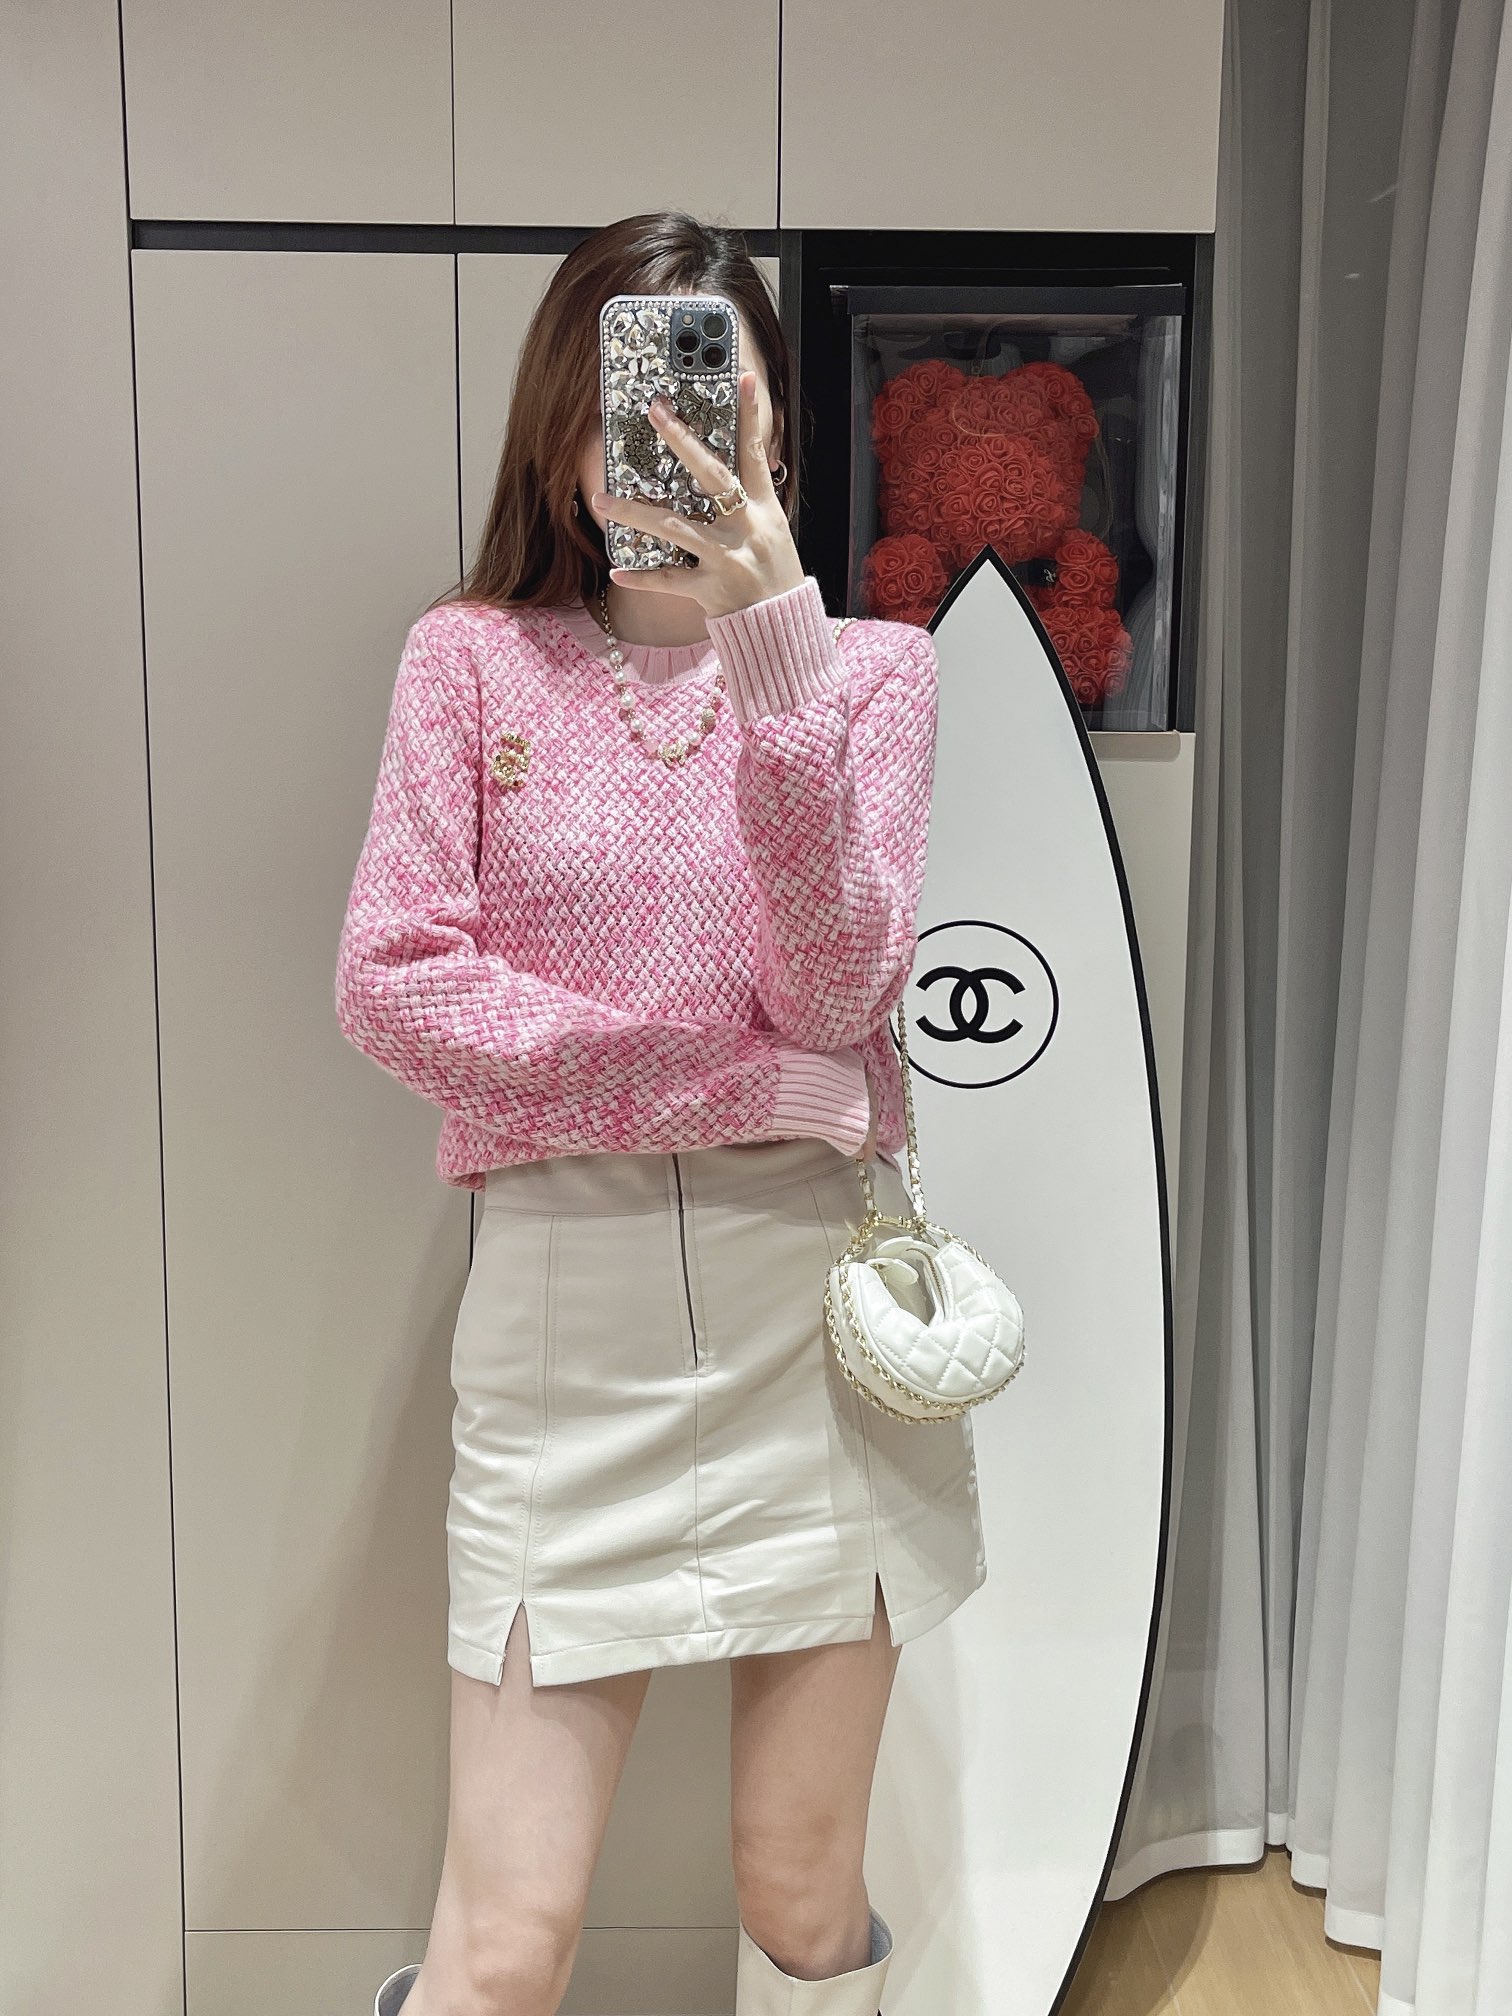 Chanel Clothing Cardigans Knit Sweater Top brands like
 Pink Knitting Wool Fall/Winter Collection